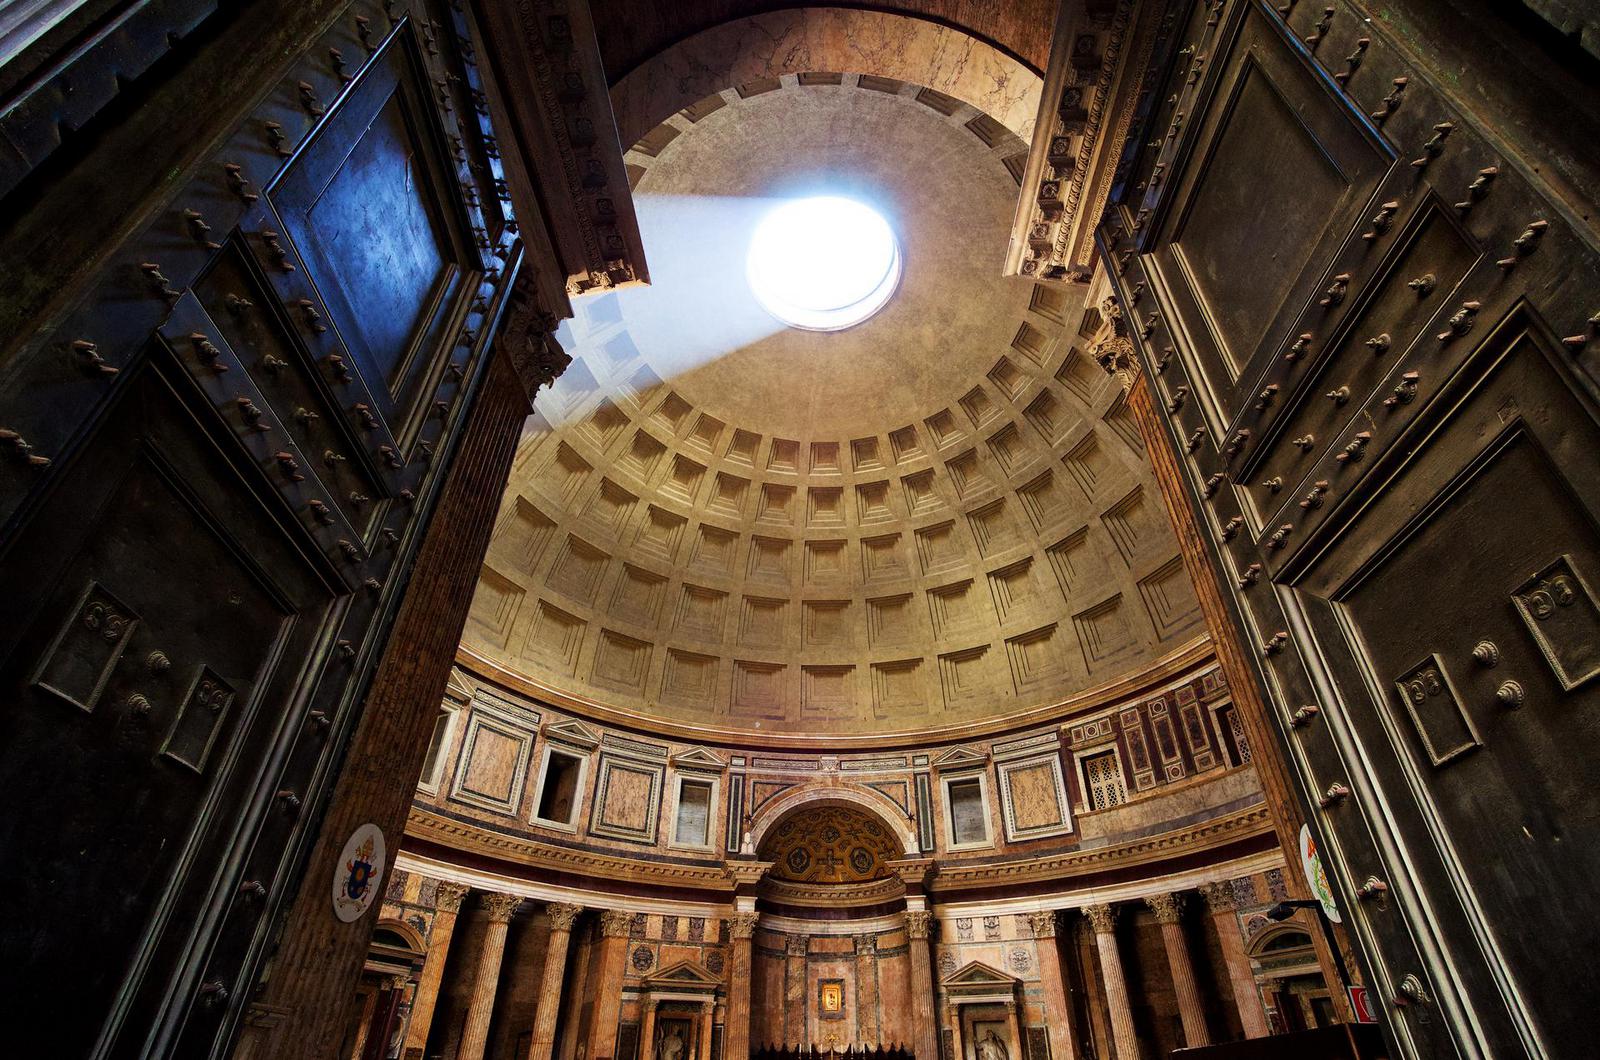 Entrance to the grand dome of the Pantheon.